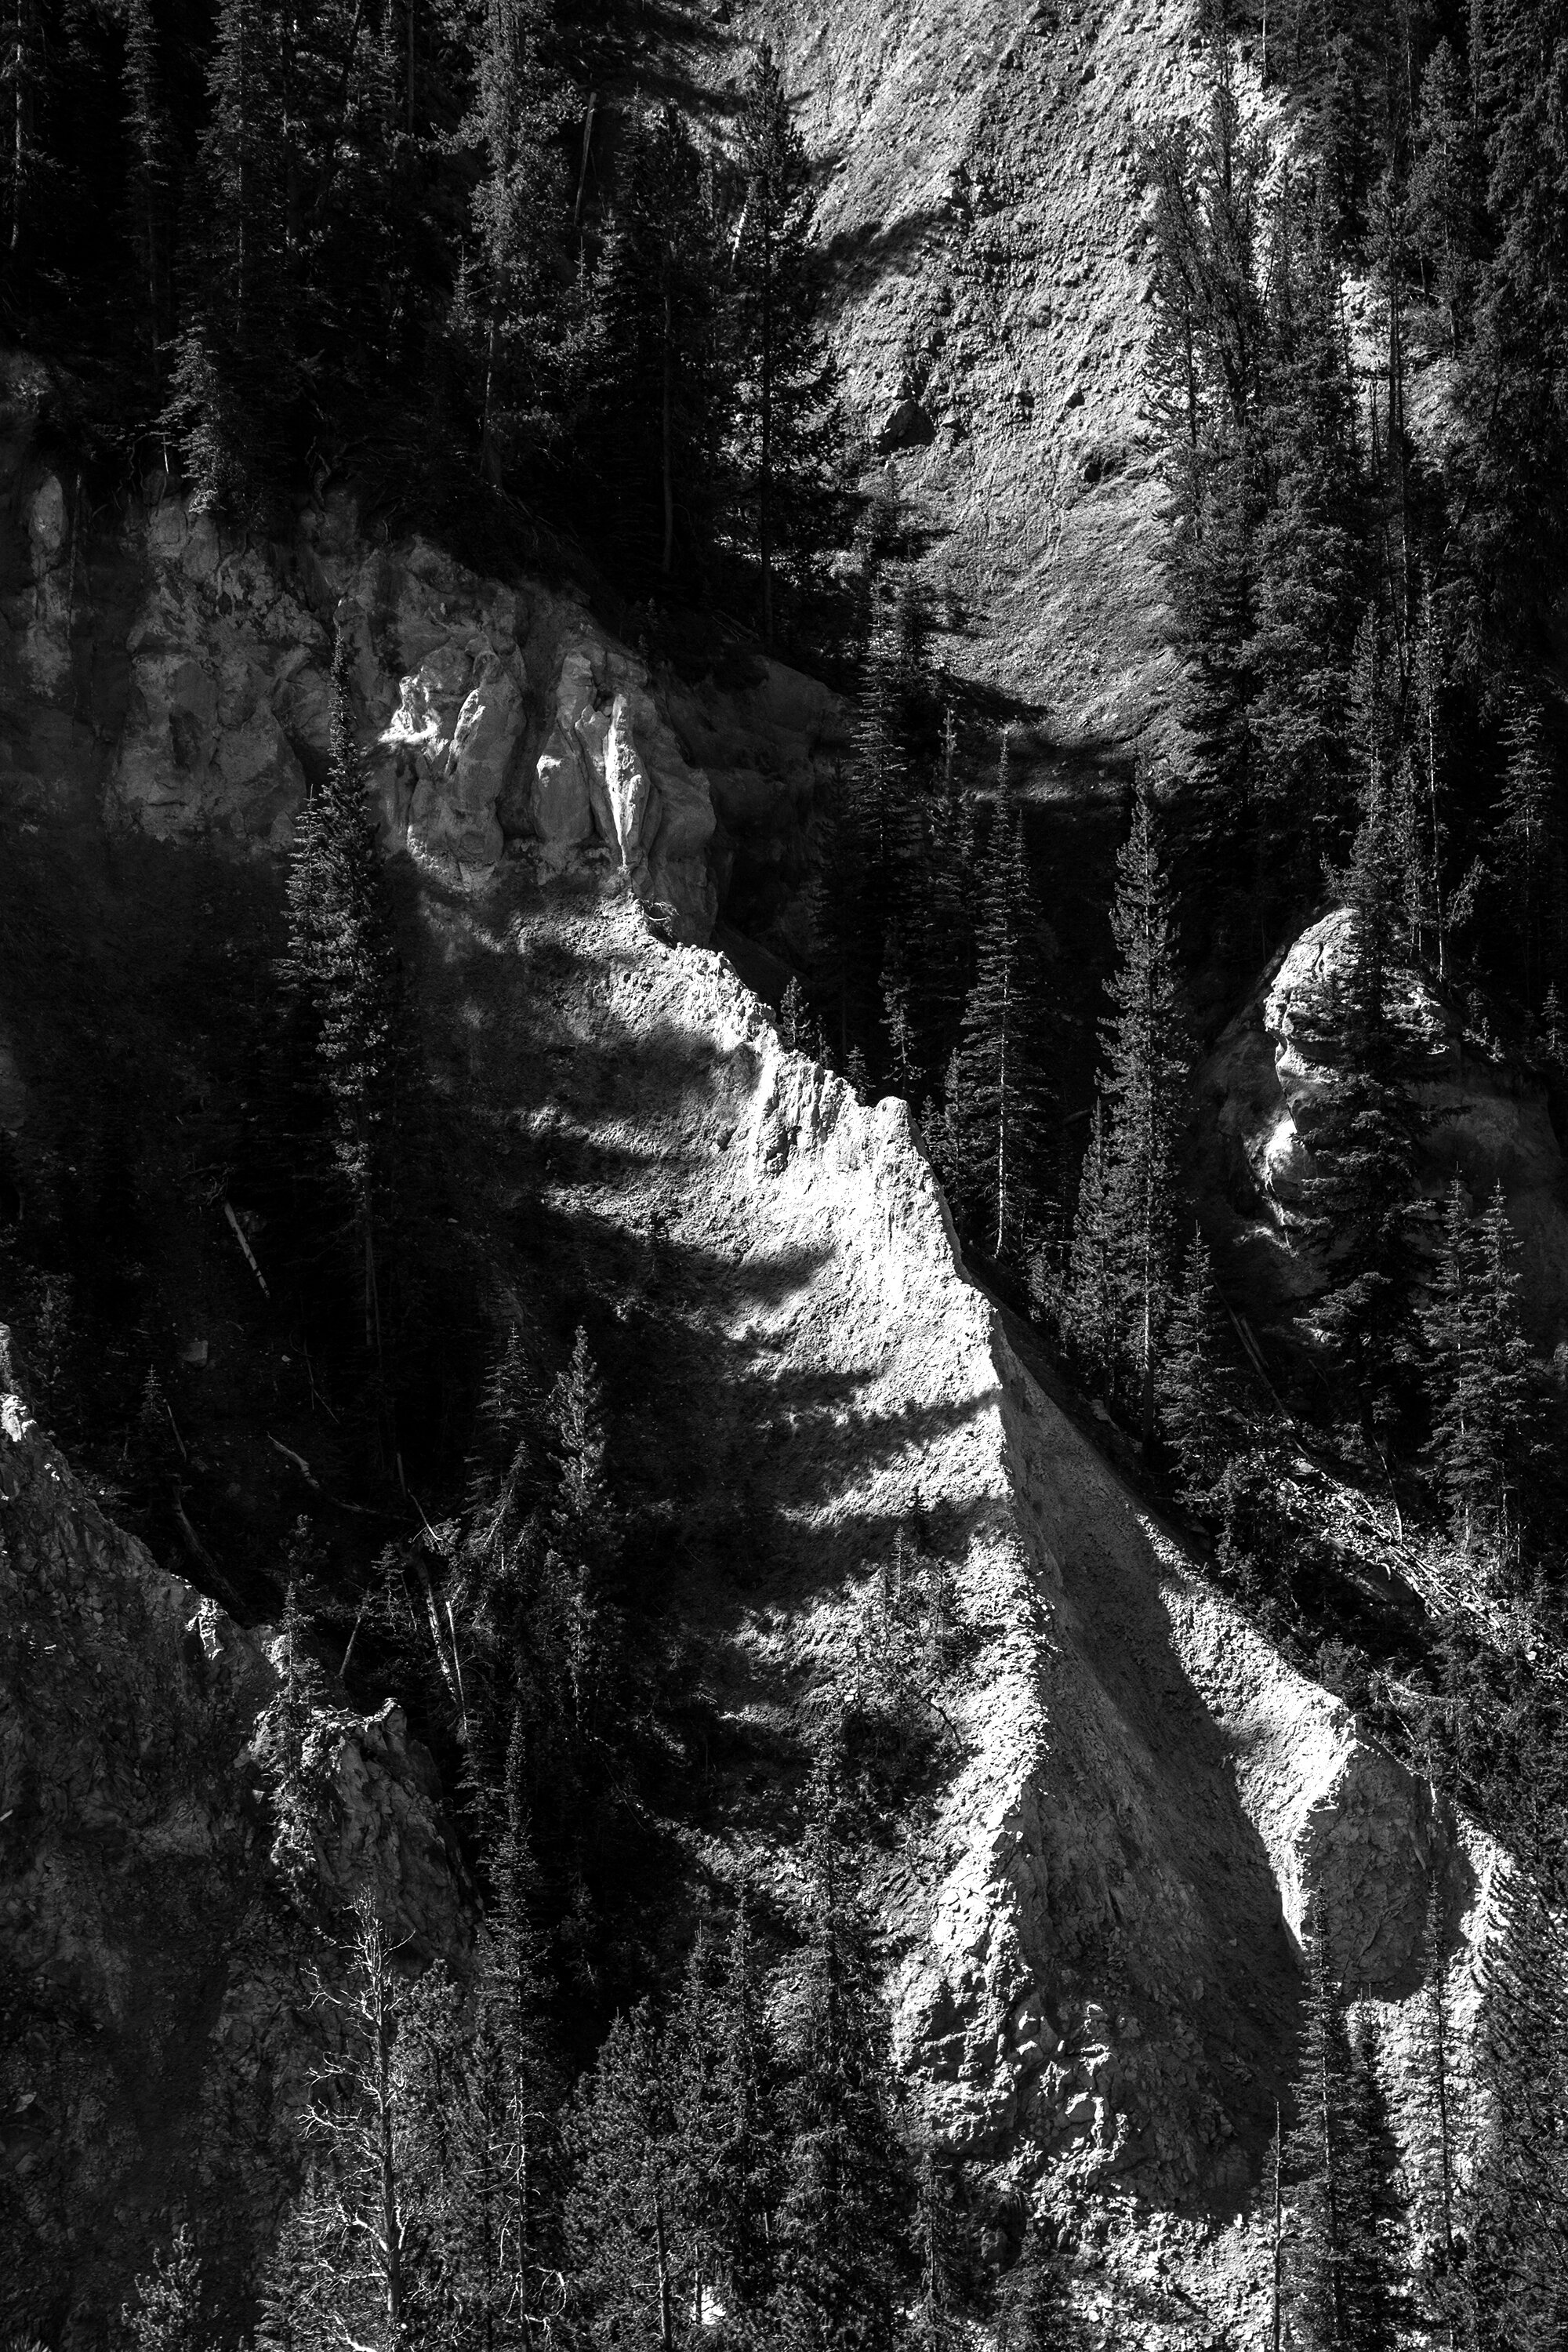 MOUNTAINSIDE ABSTRACT / WYOMING / 2015